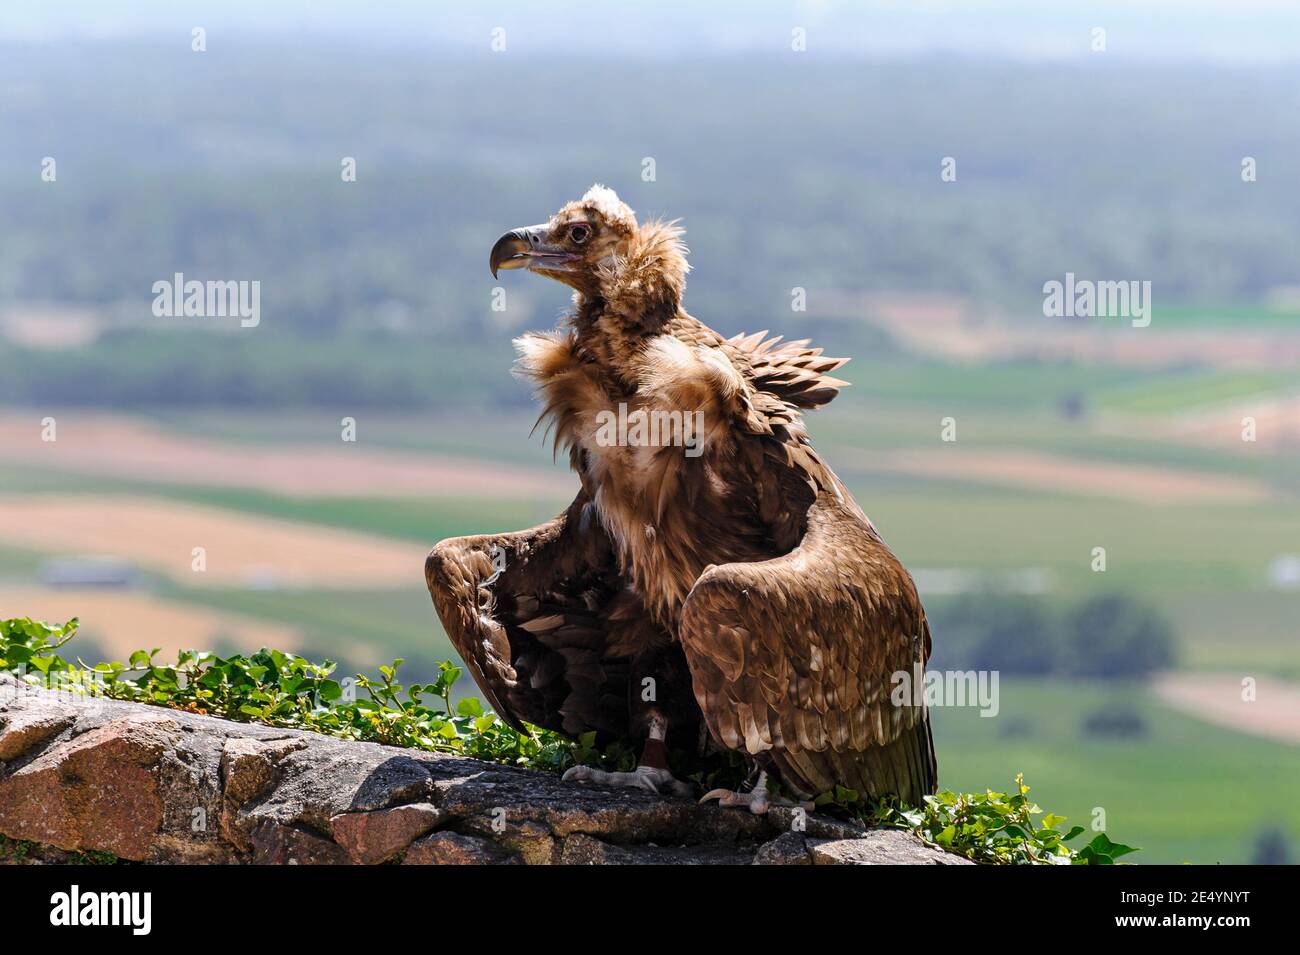 griffon vulture perched on a wall - The scavenger bird, perched on a wall, spreads its wings halfway out while watching over the valley. Stock Photo